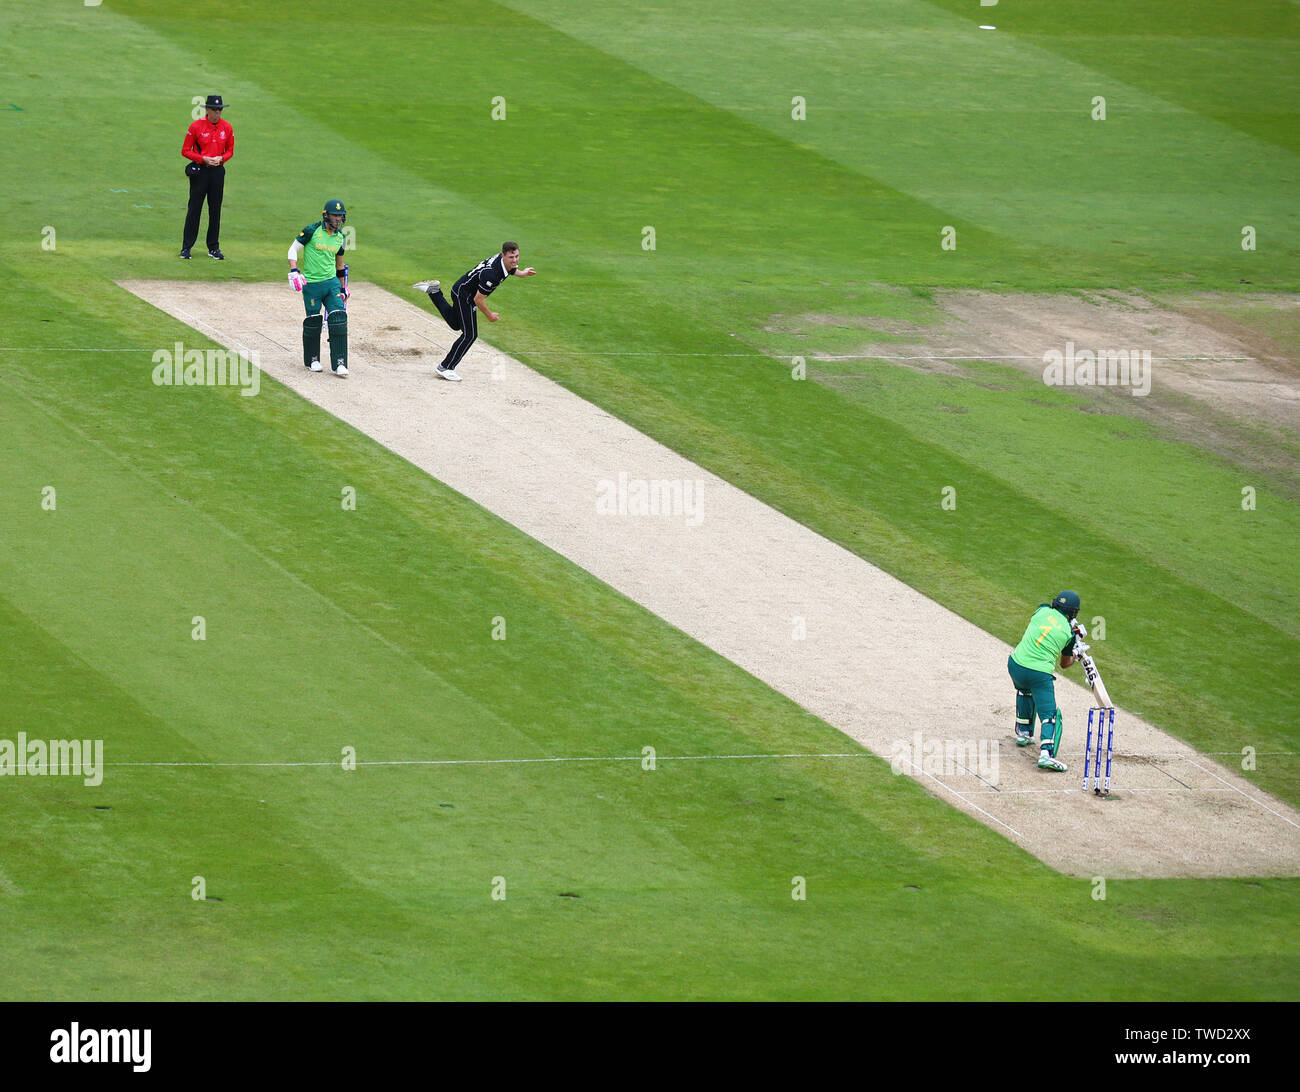 BIRMINGHAM, ENGLAND. 19 JUNE 2019: A general view as Matt Henry of New Zealand bowls at Hashim Amla of South Africa during the New Zealand v South Africa, ICC Cricket World Cup match, at Old Trafford, Manchester, England. Stock Photo